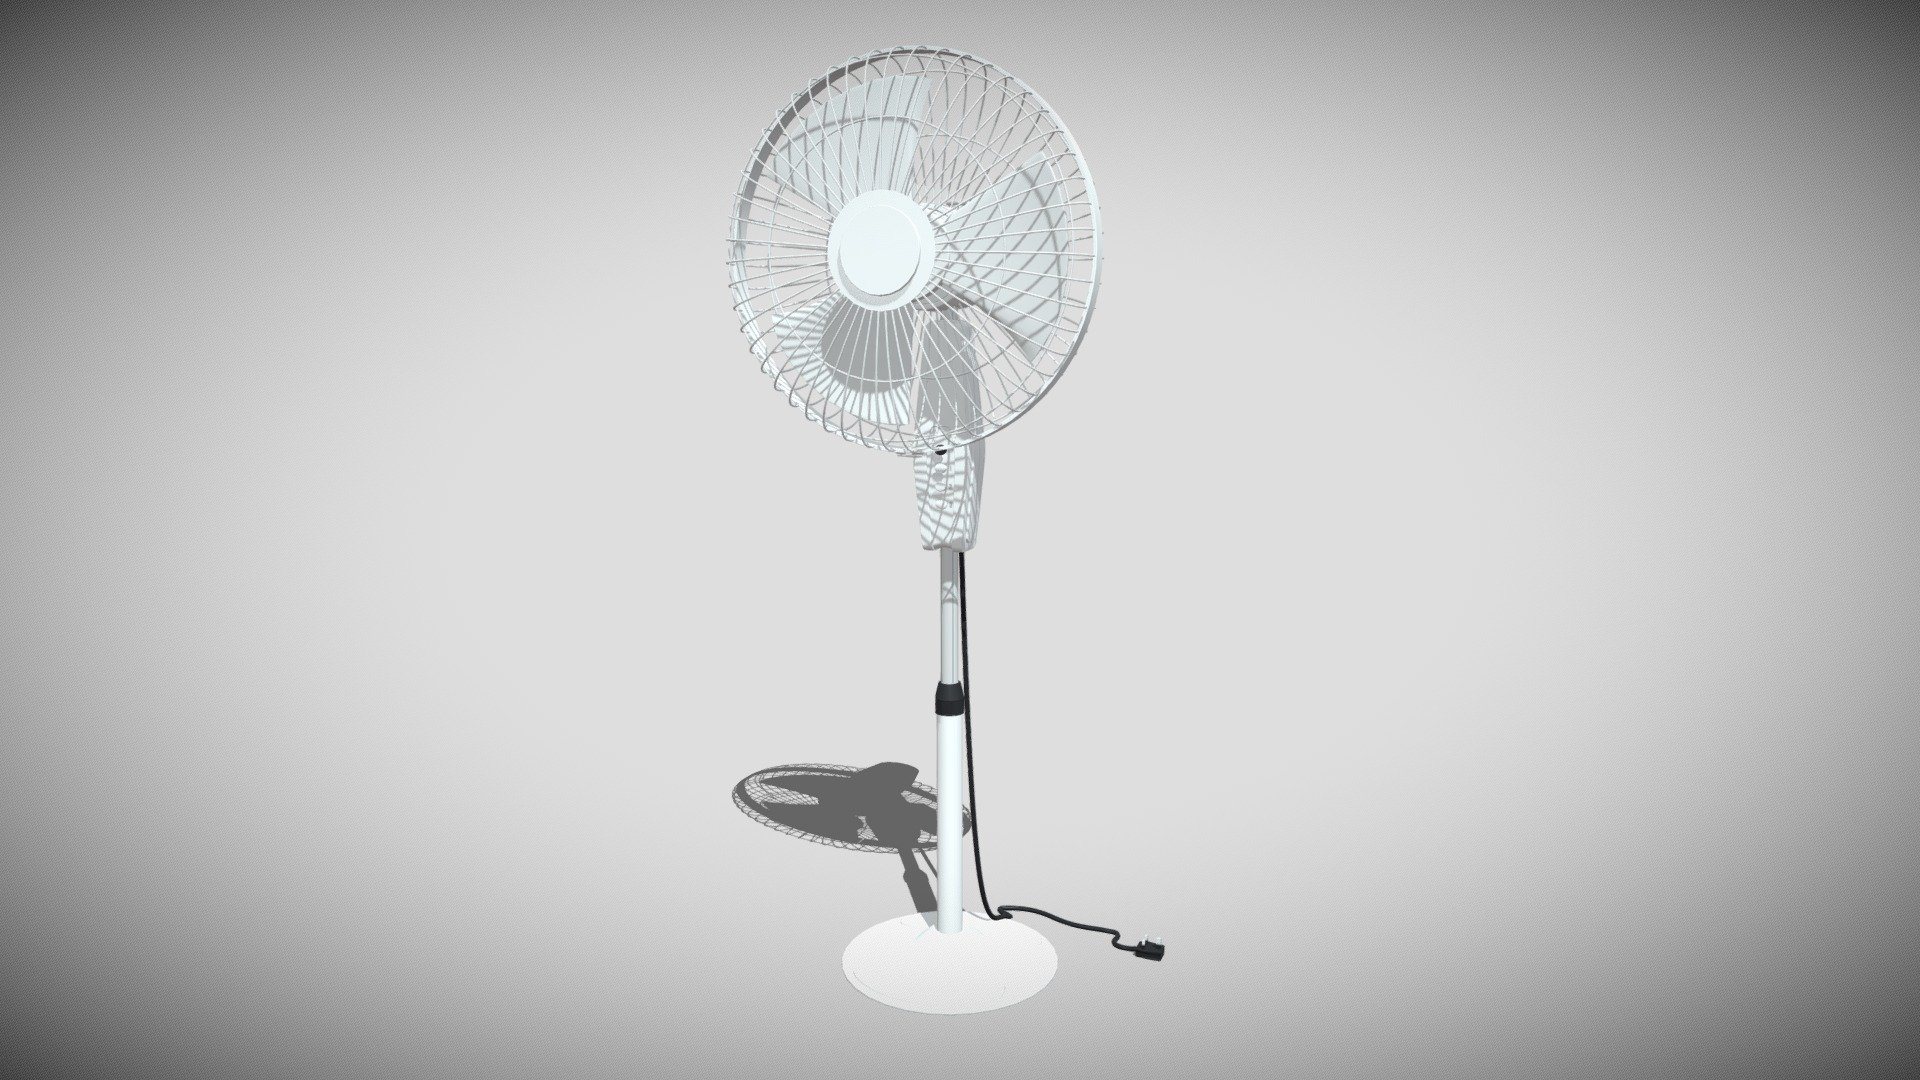 Detailed model of a Pedestal Fan, modeled in Cinema 4D.The model was created using approximate real world dimensions.

The model has 46,544 polys and 46,180 vertices.

An additional file has been provided containing the original Cinema 4D project files with both standard and v-ray materials, textures and other 3d export files such as 3ds, fbx and obj 3d model